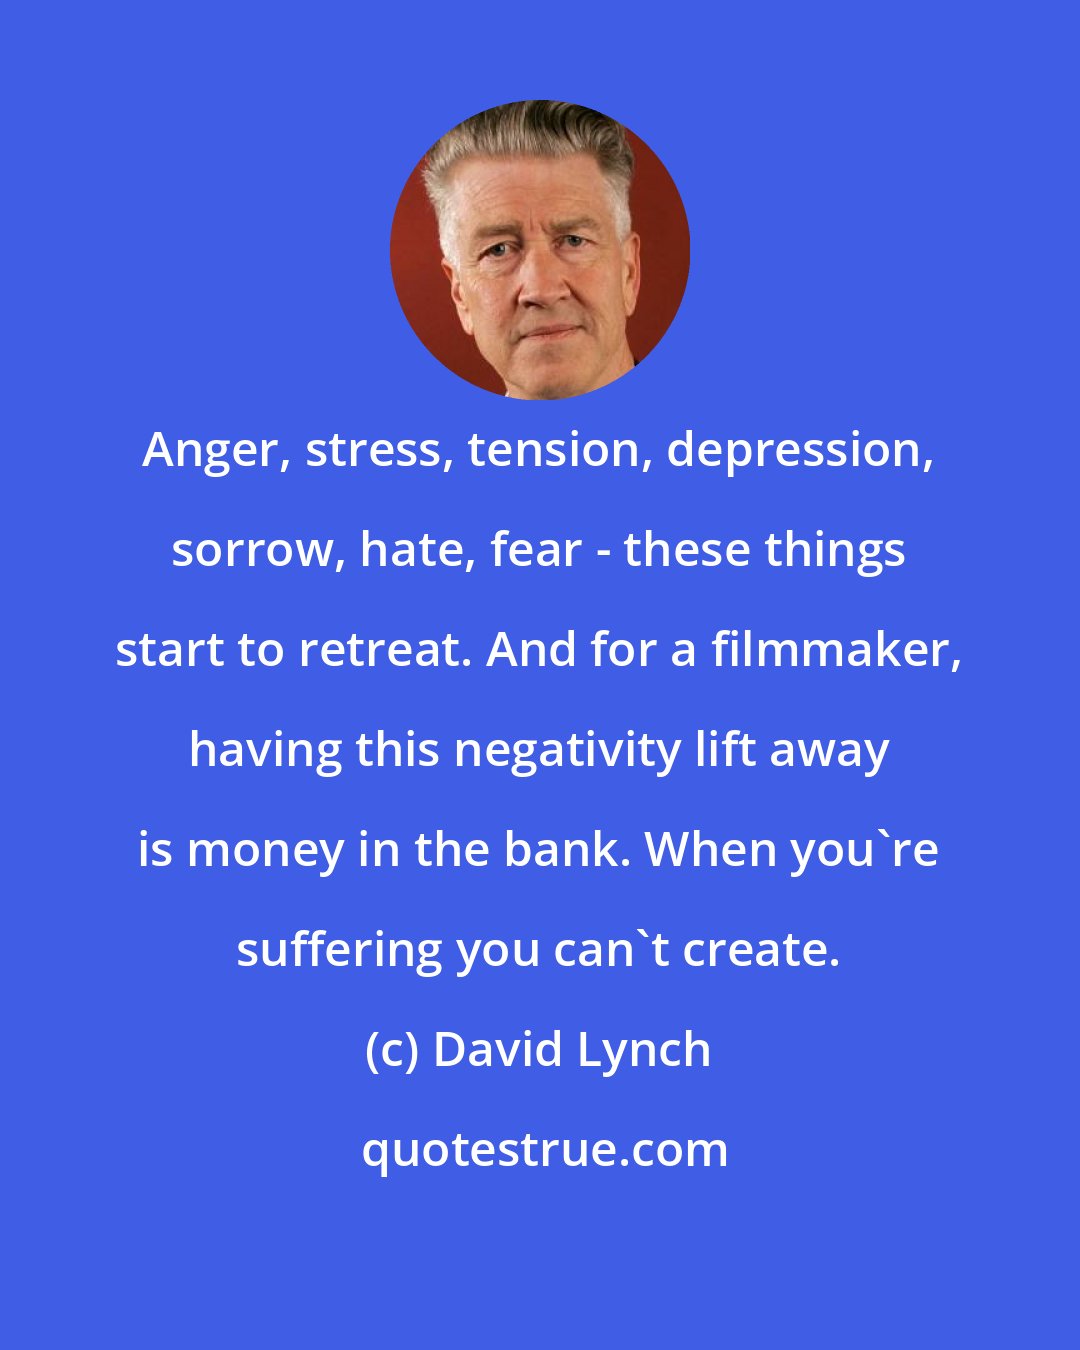 David Lynch: Anger, stress, tension, depression, sorrow, hate, fear - these things start to retreat. And for a filmmaker, having this negativity lift away is money in the bank. When you're suffering you can't create.